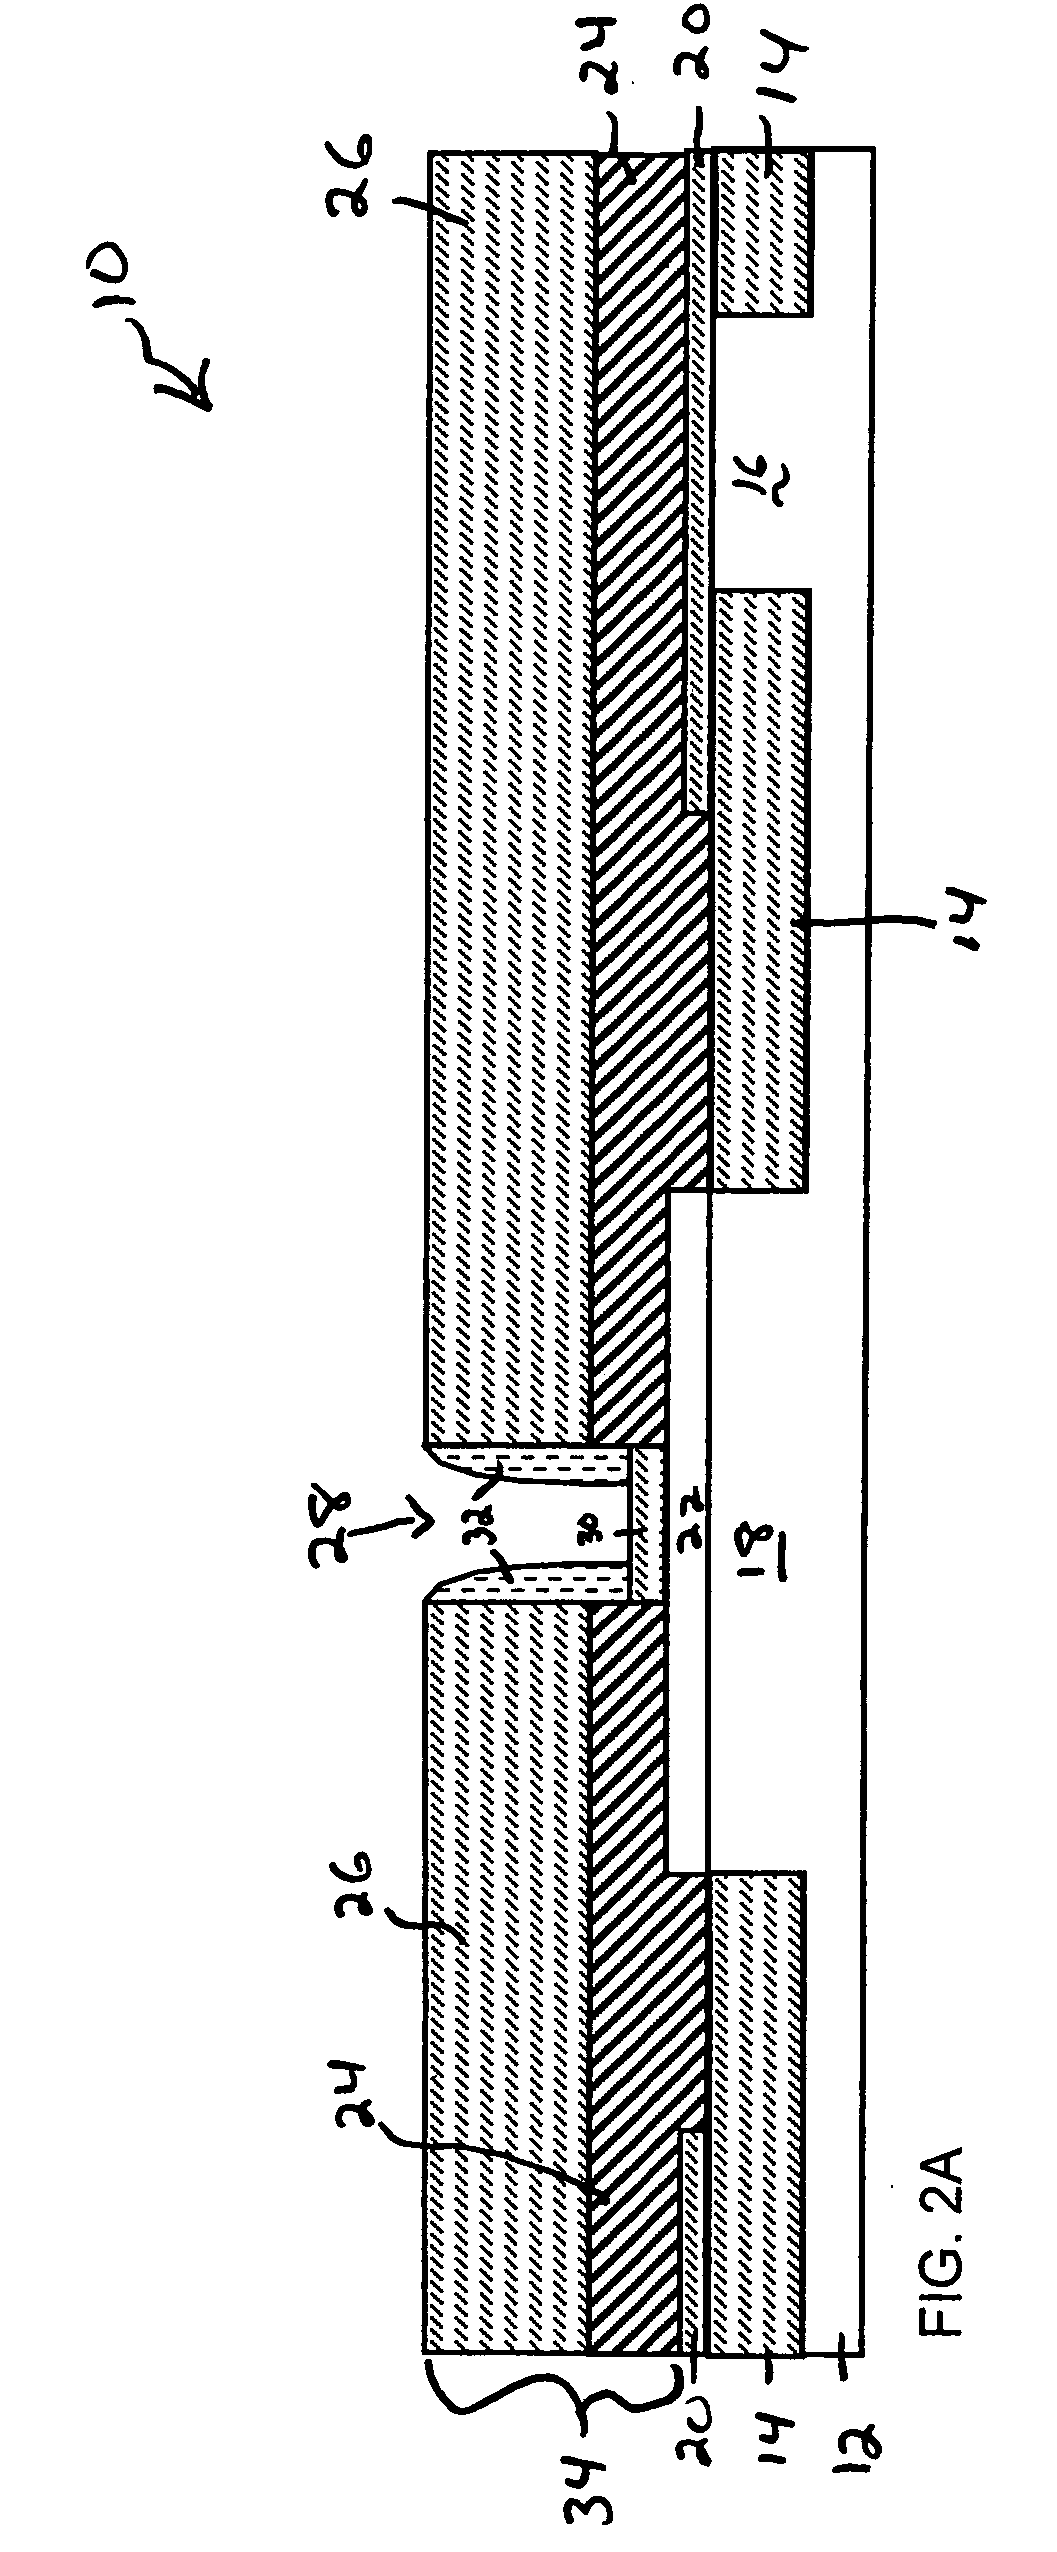 Bipolar transistor having self-aligned silicide and a self-aligned emitter contact border